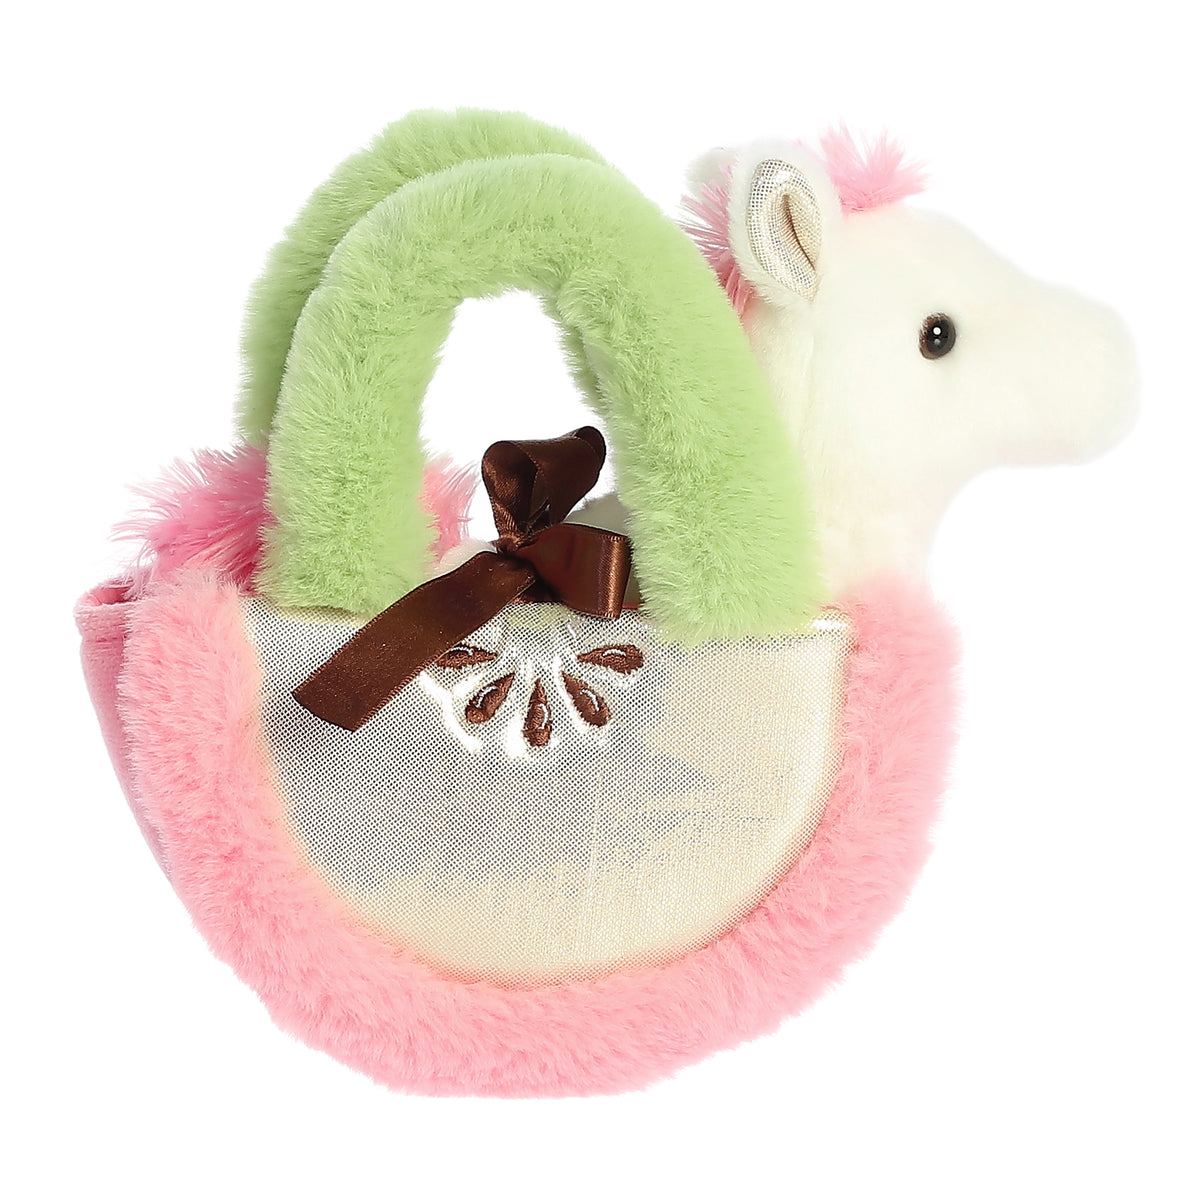 Apple Pony plush carrier by Aurora with green straps, apple core, and a fuzzy white & pink pony stuffed animal inside.